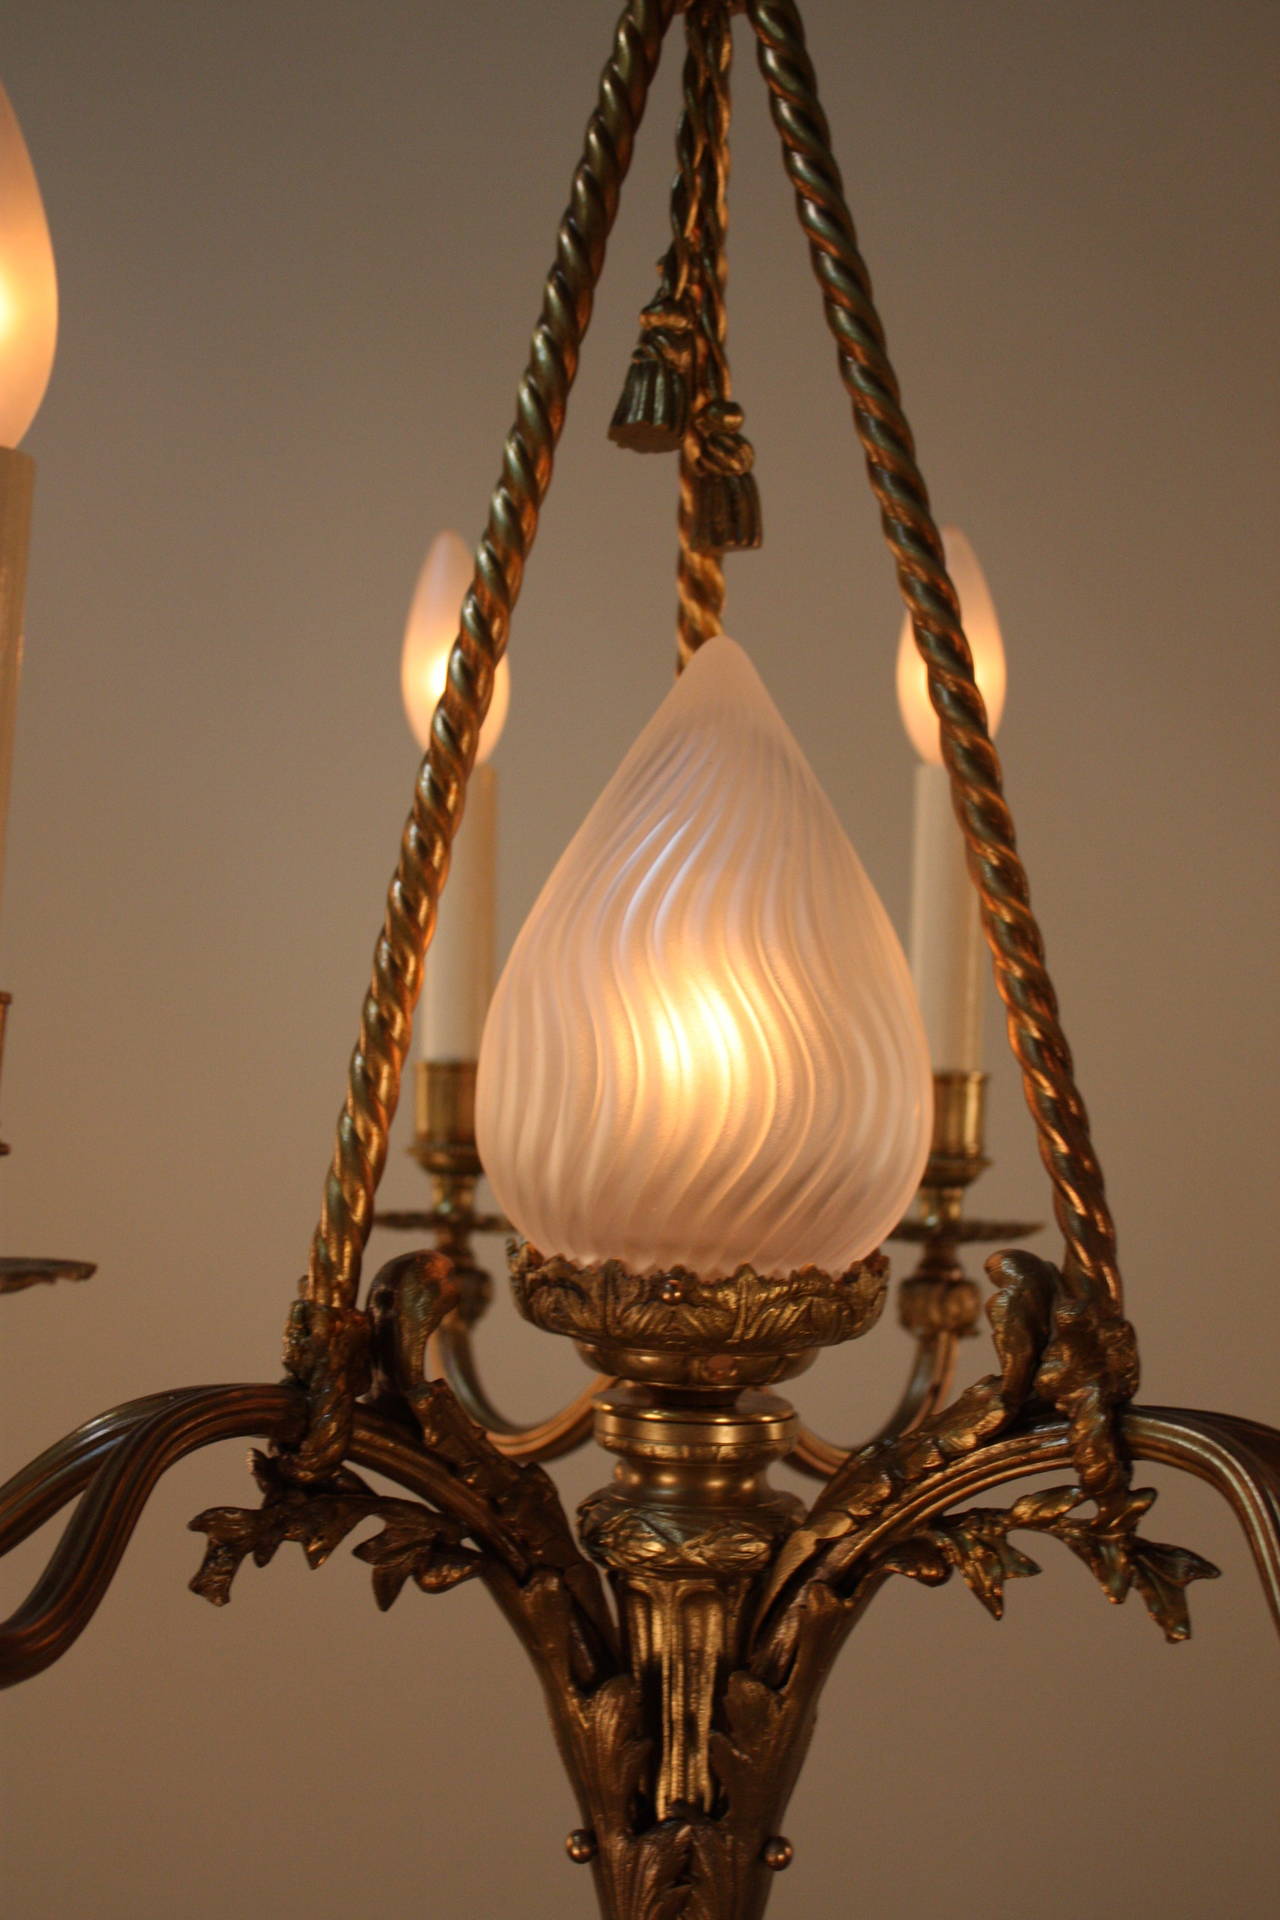 Elegant six candle light with center glass torchlight bronze chandelier.